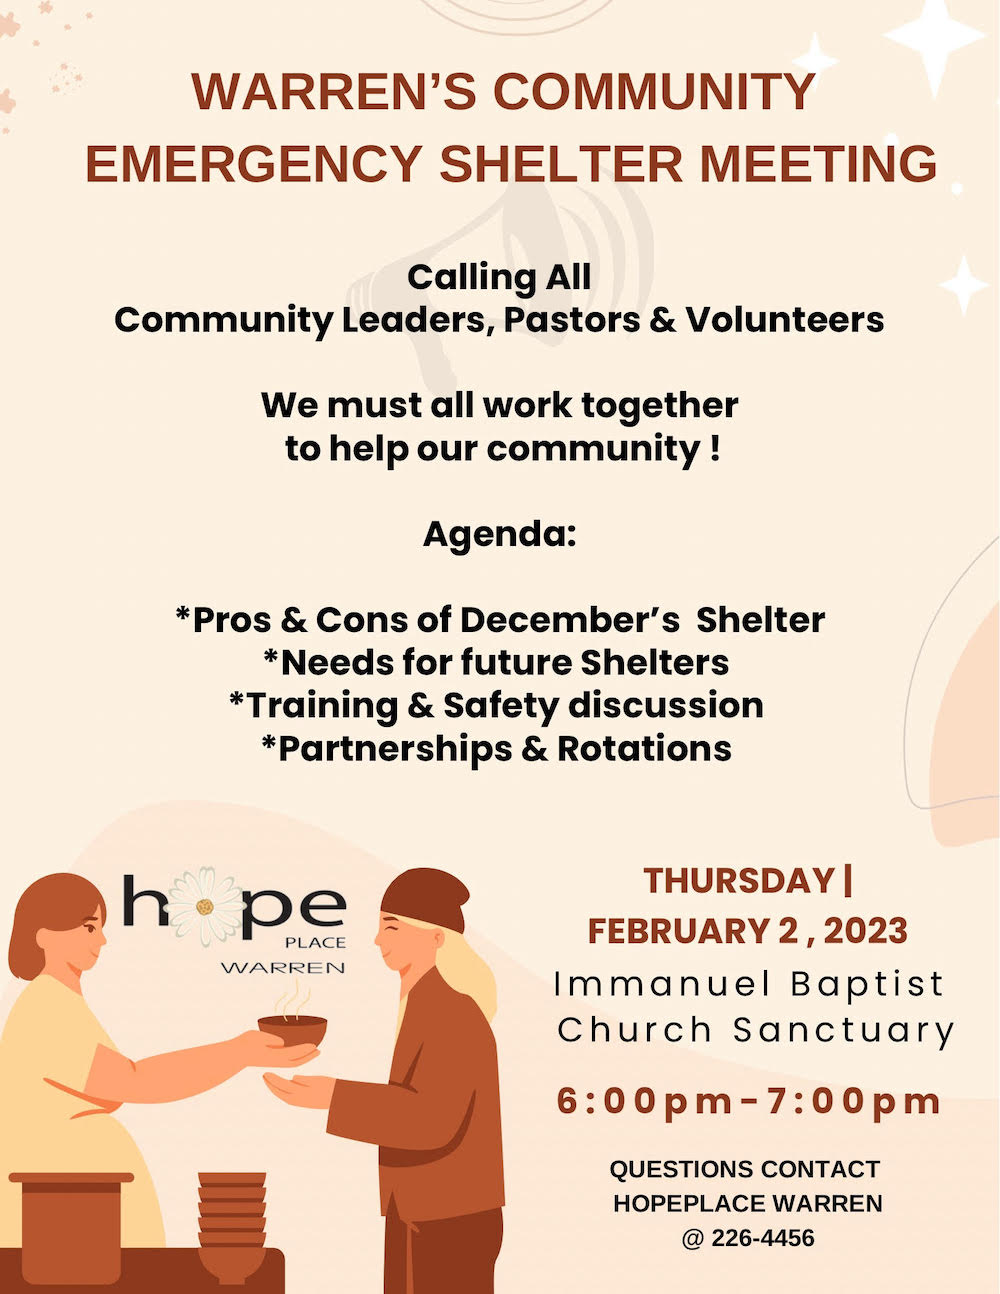 Meeting set to discuss emergency community shelter